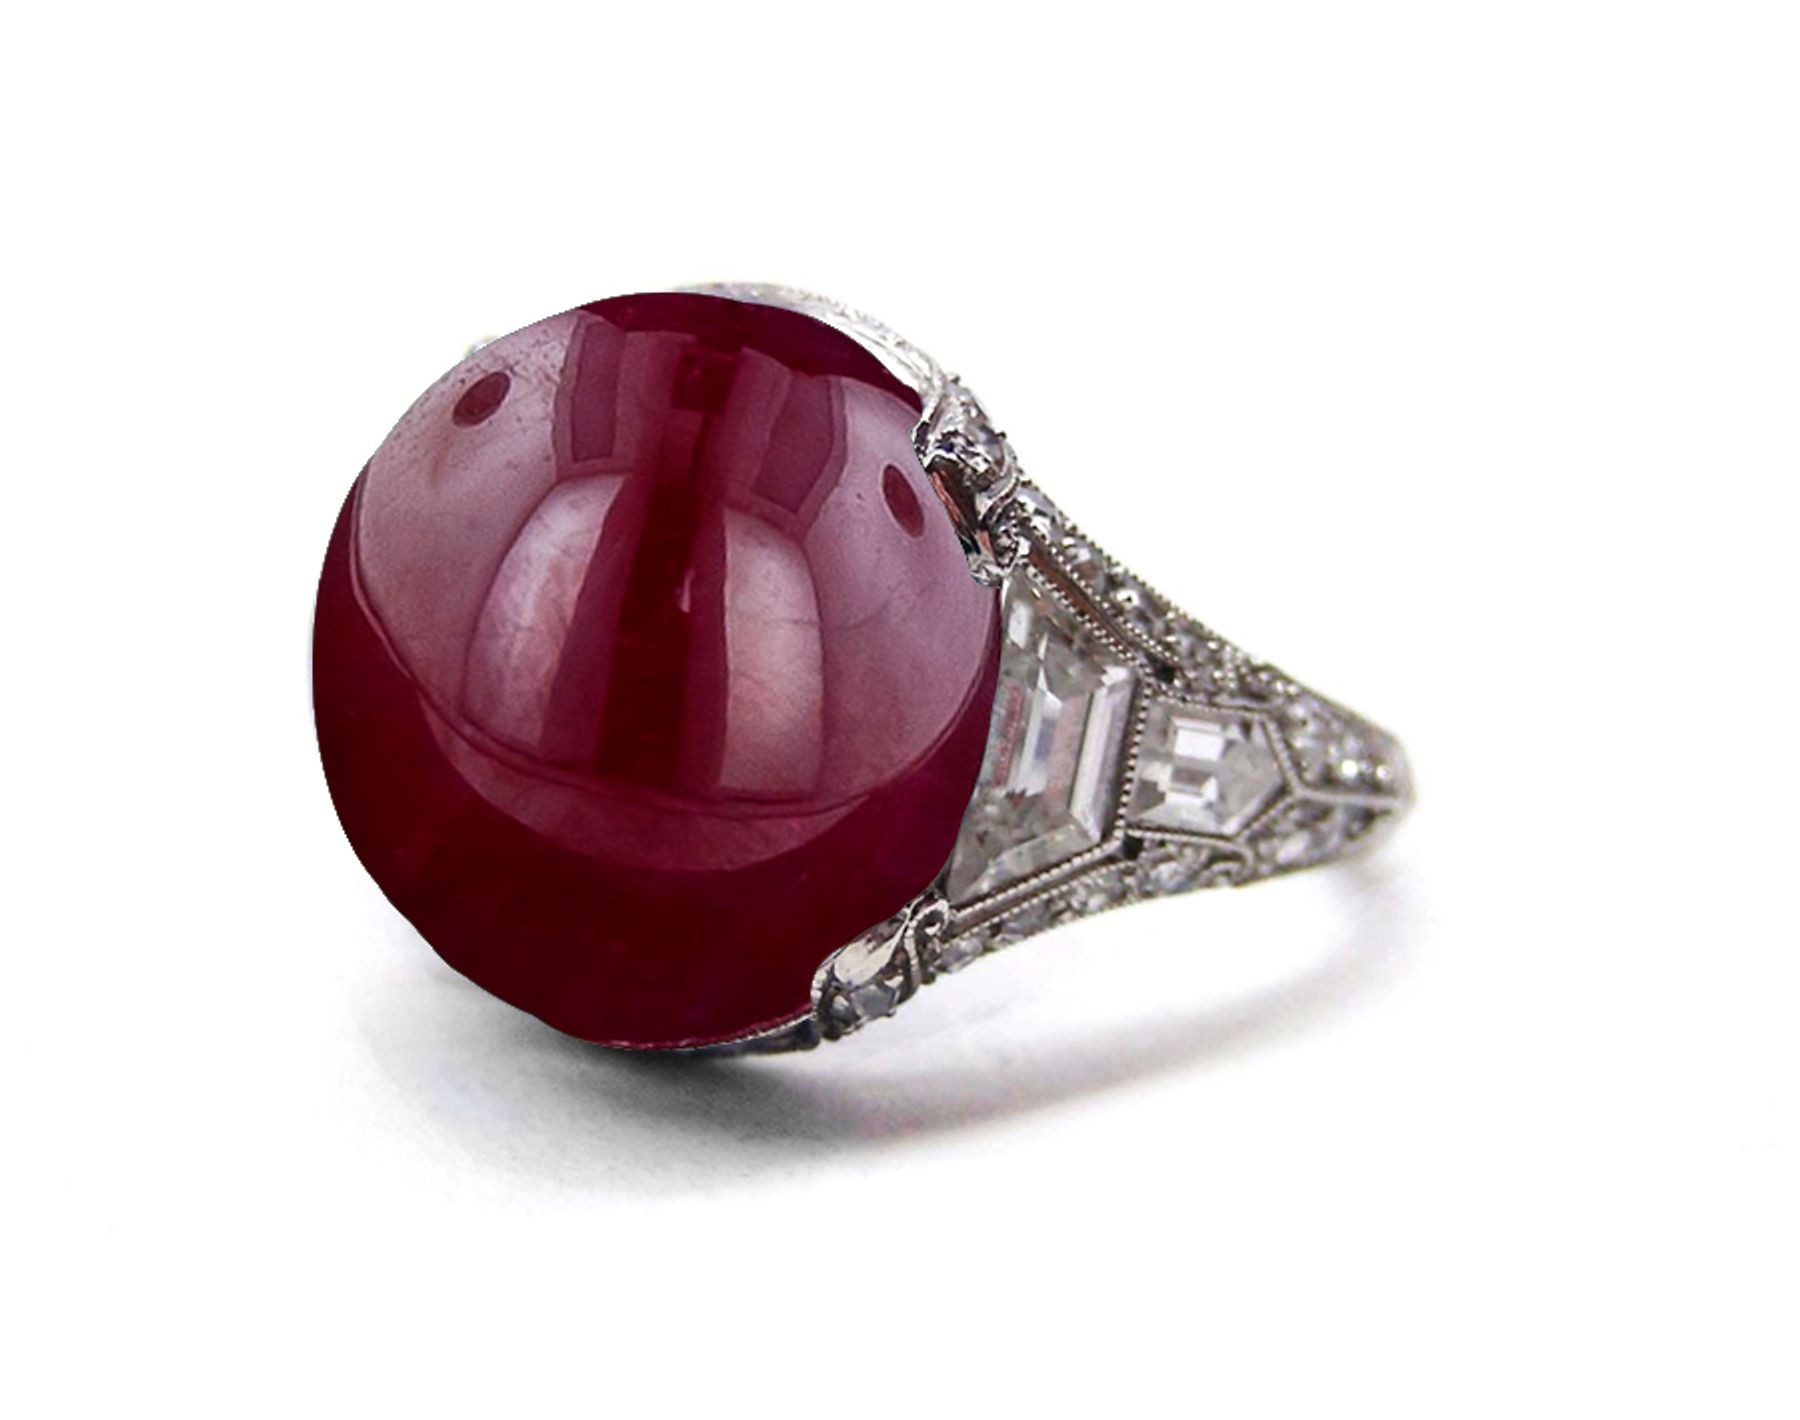 Edwardian, French, Belle Epoque, Platinum, Milgrain, Filigree, Luscious Red, Ruby Cabochon Ring Flanked